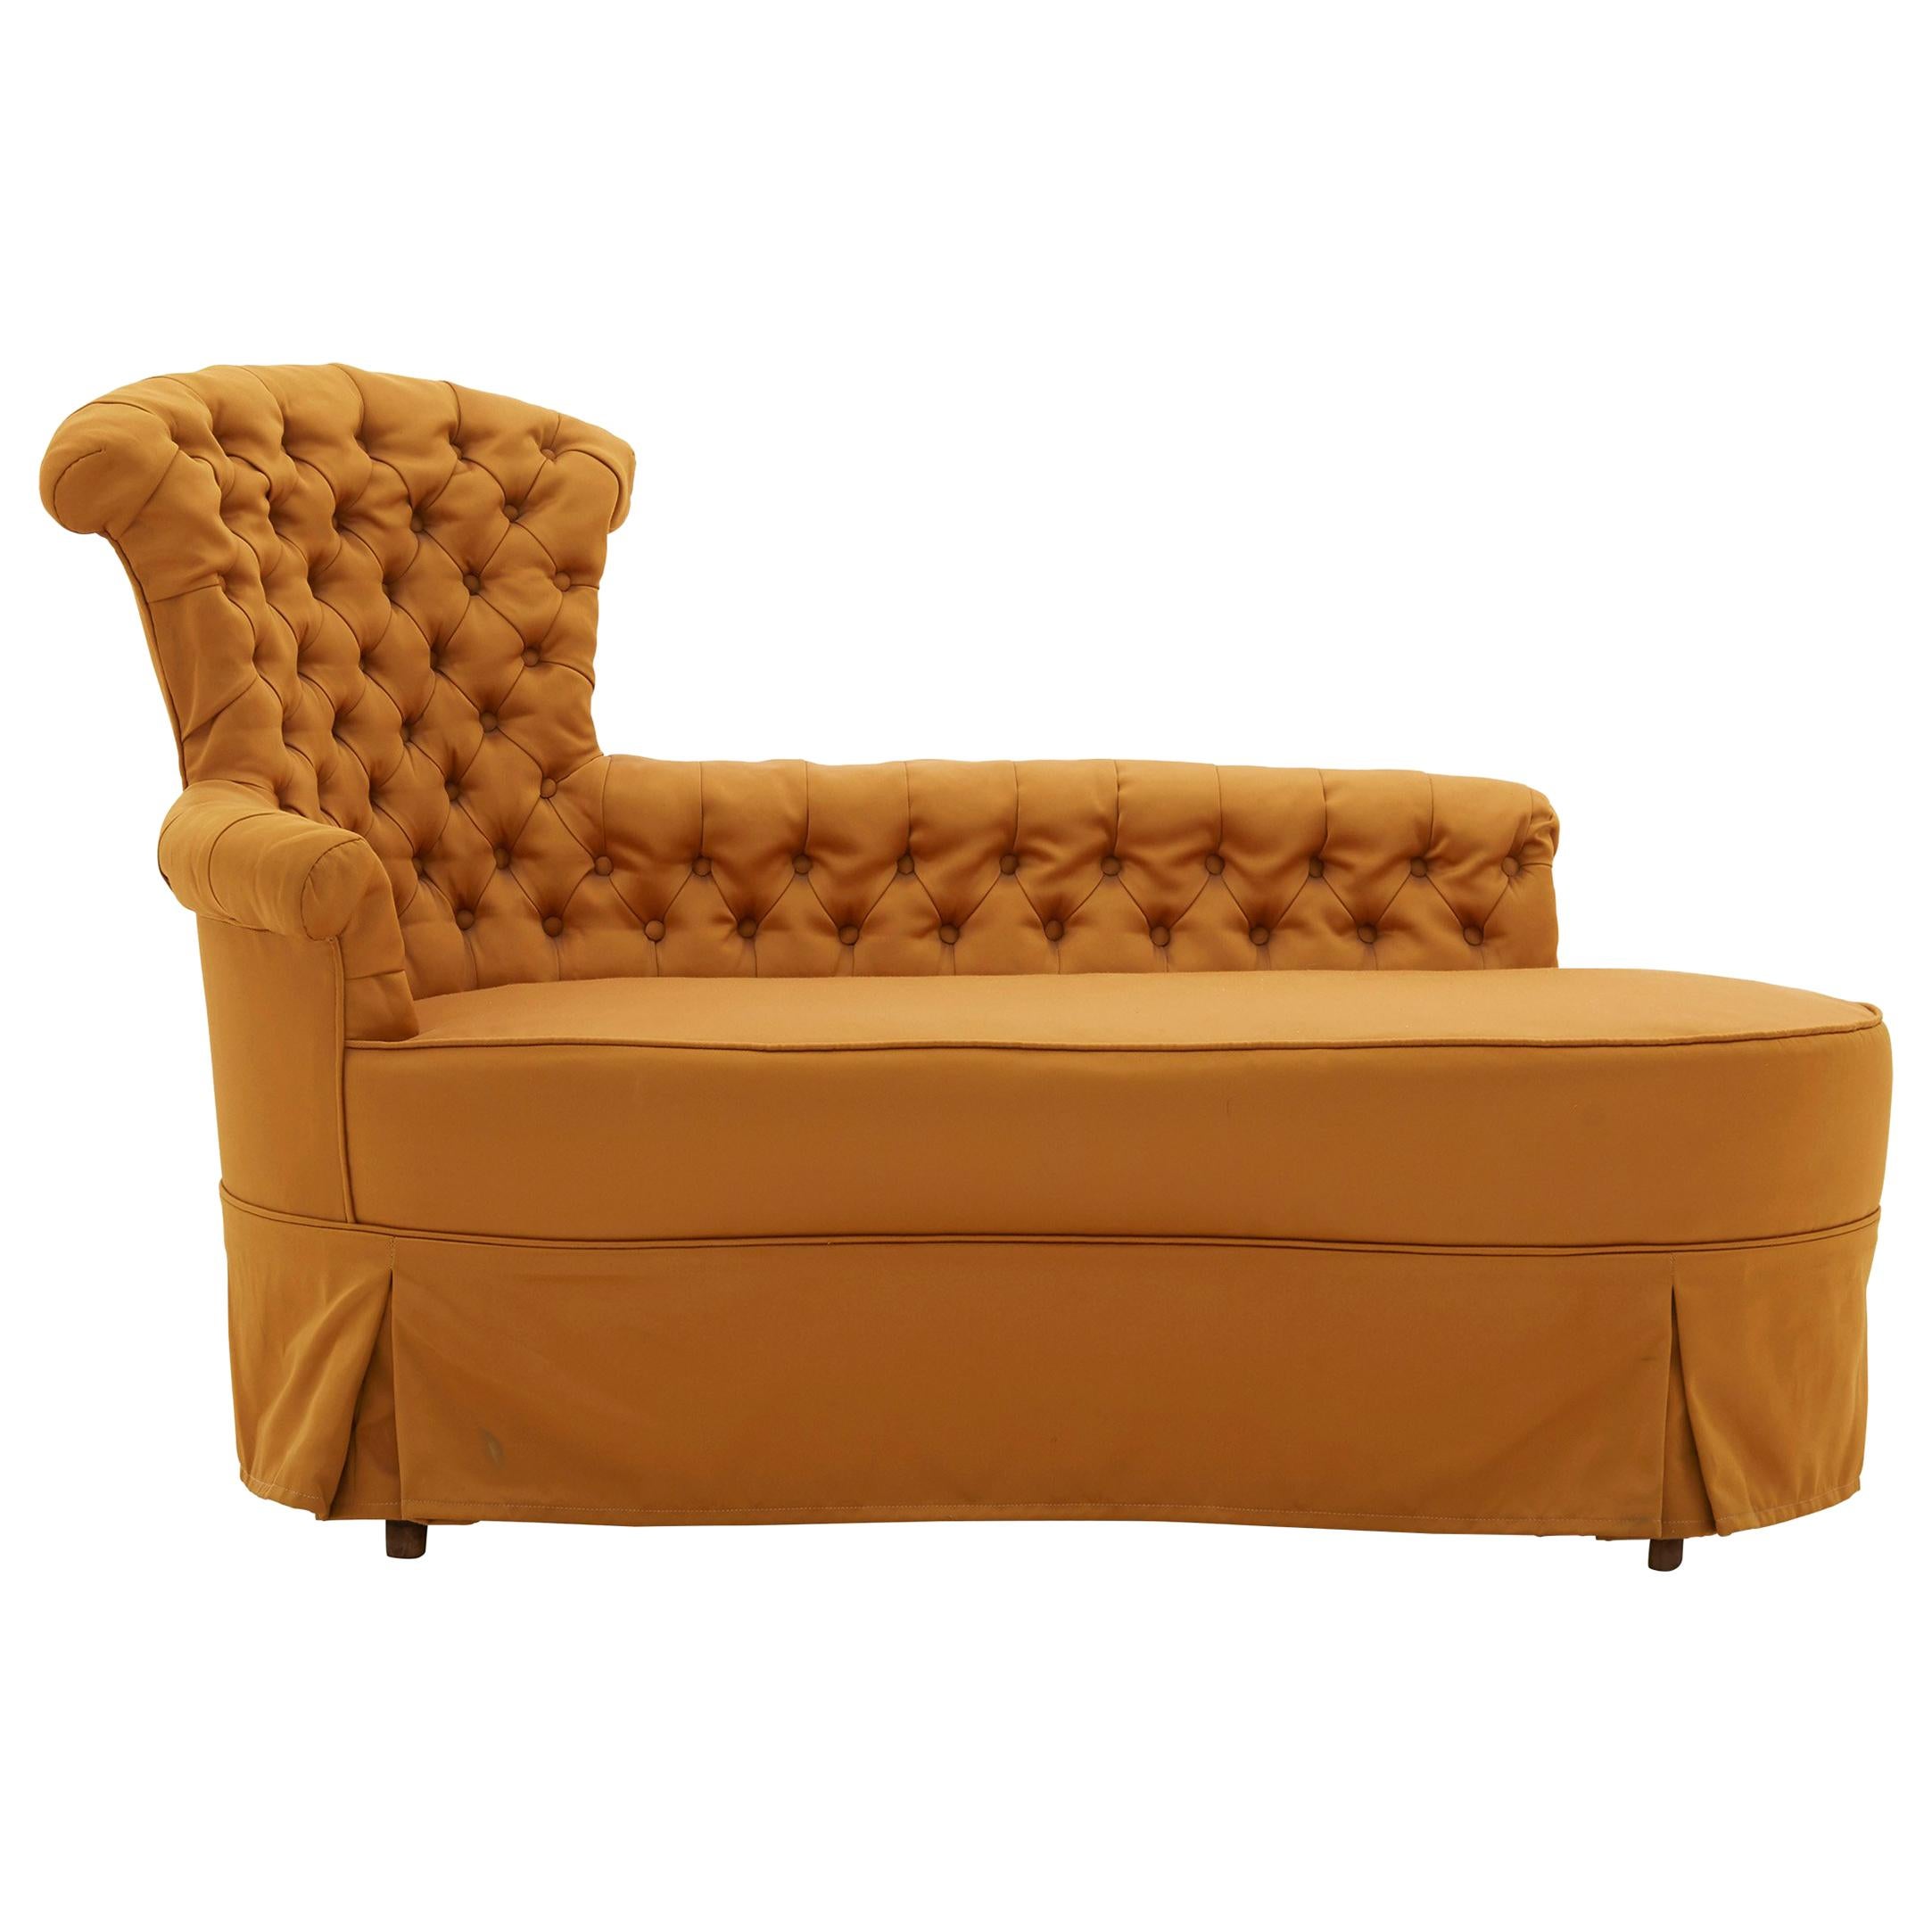 Tufted Yellow Chaise Lounge